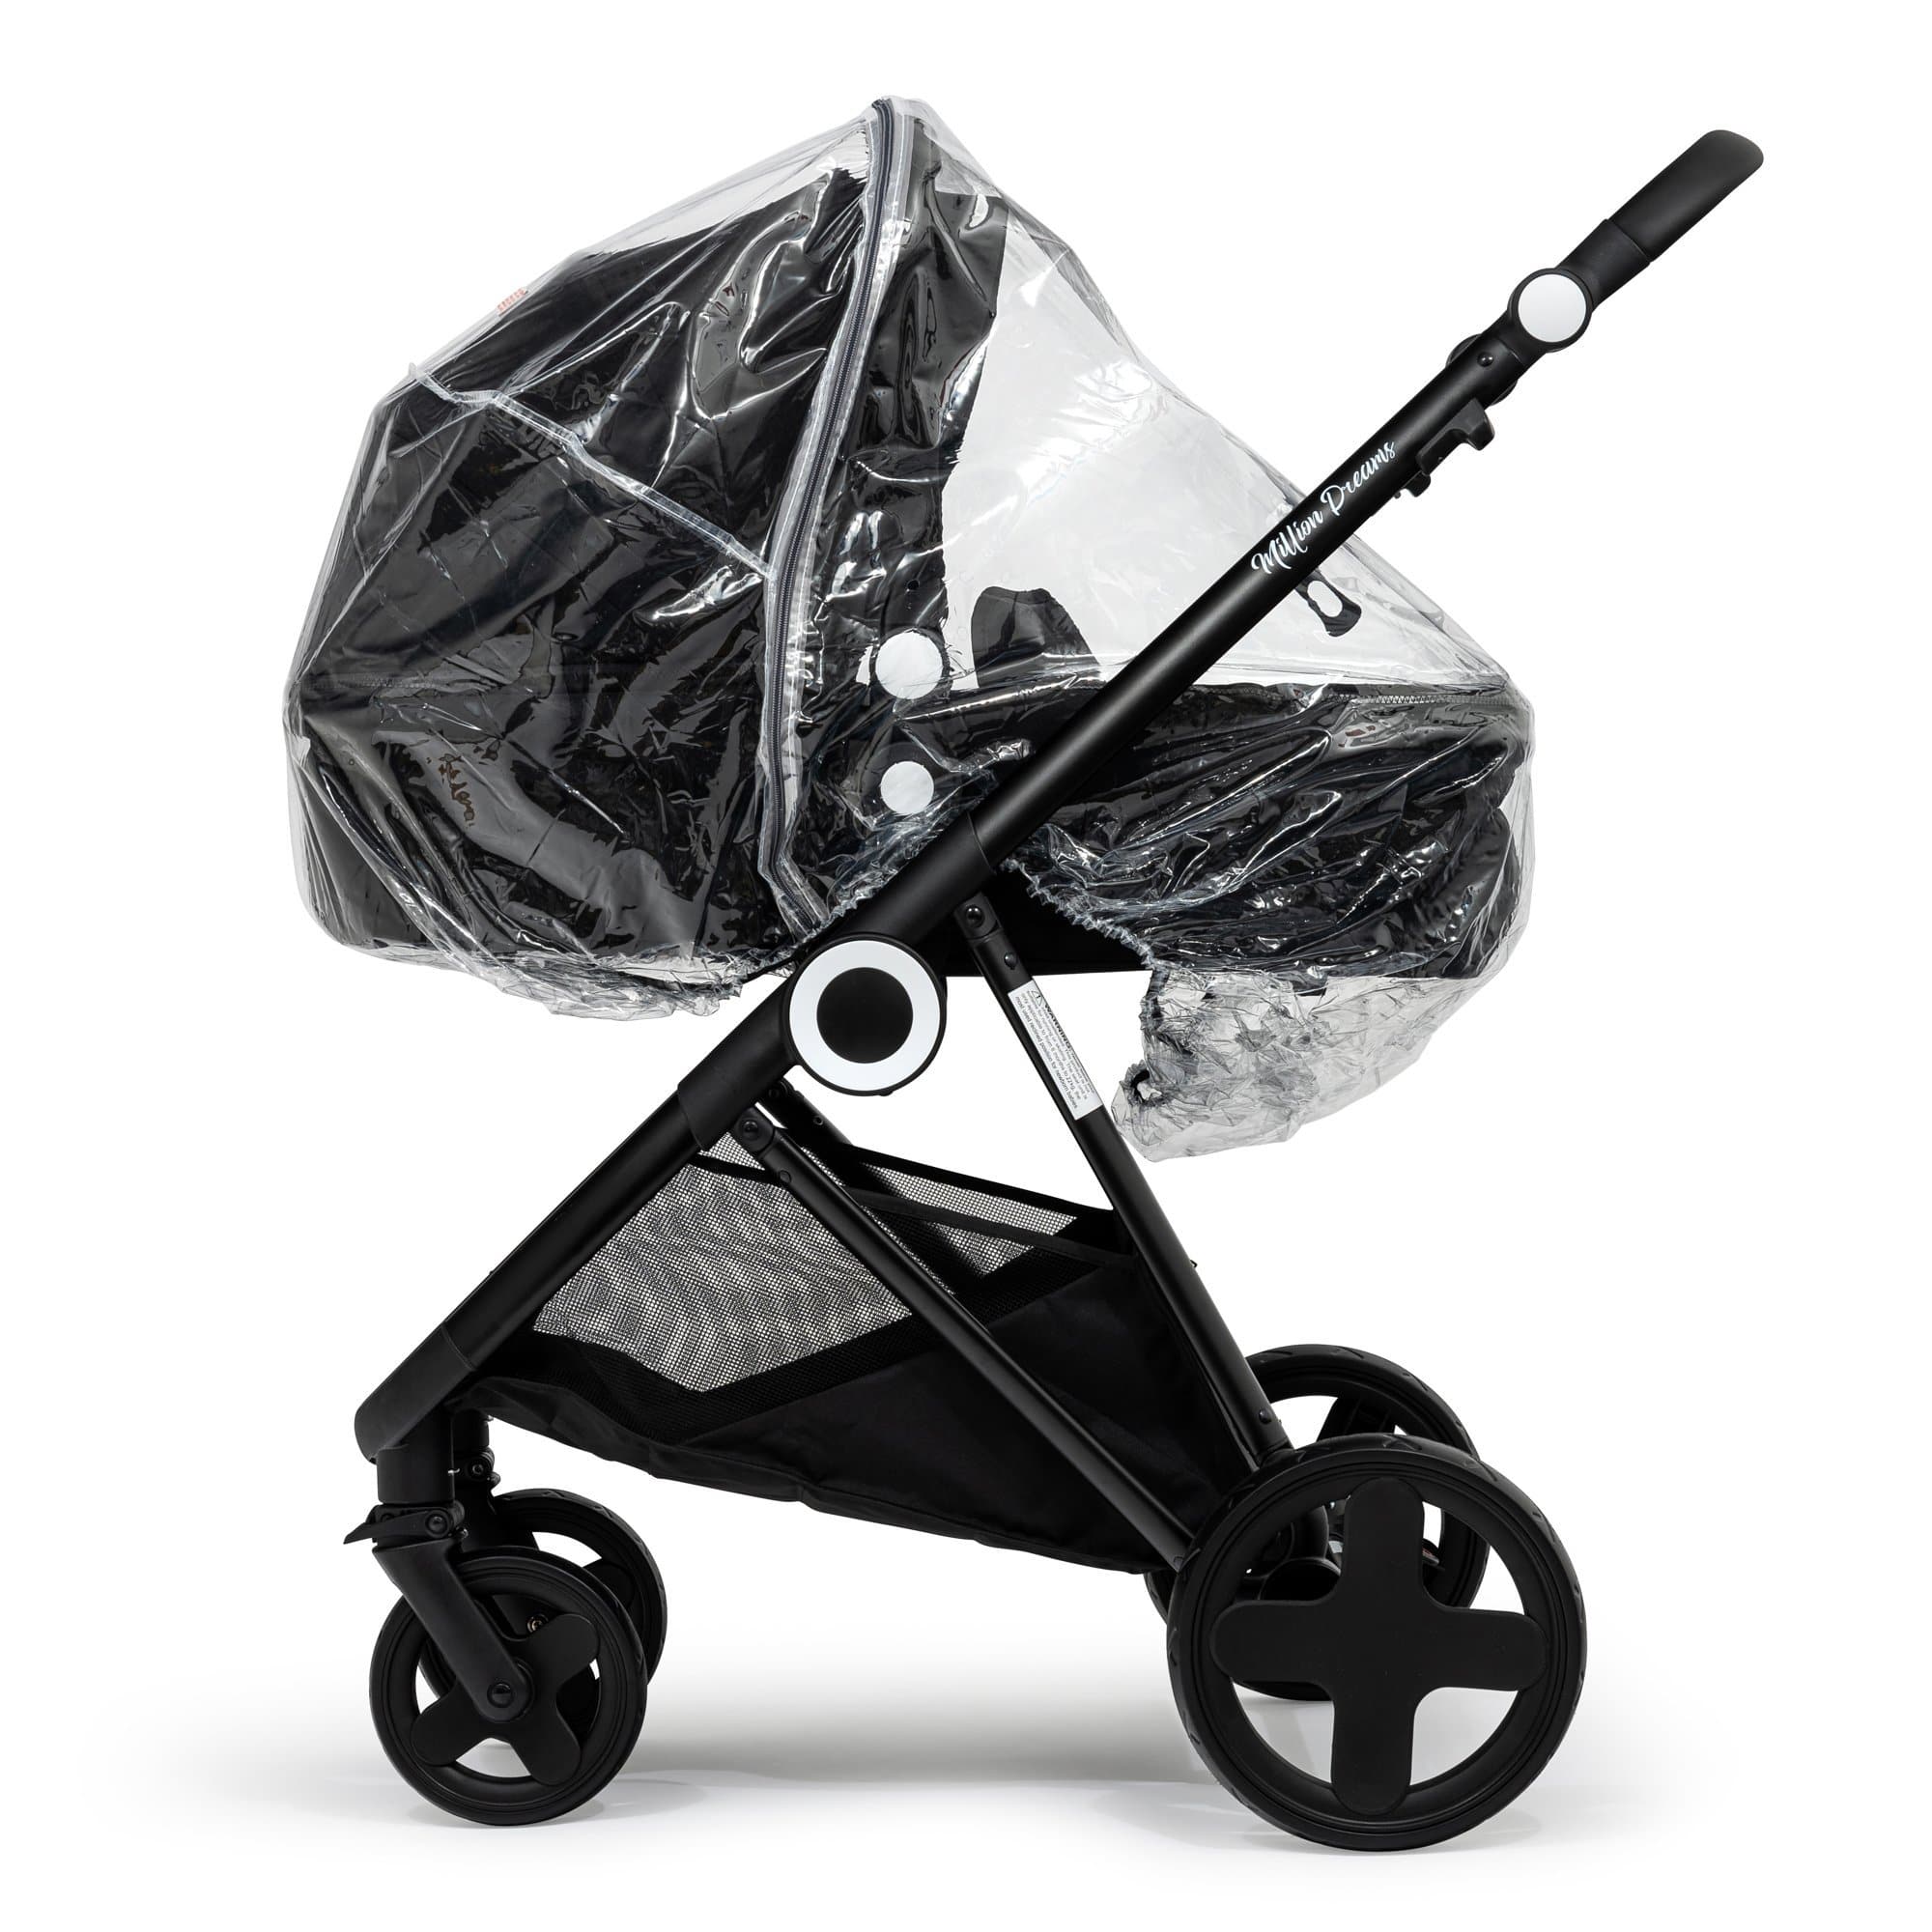 2 in 1 Rain Cover Compatible with Cam - Fits All Models - For Your Little One